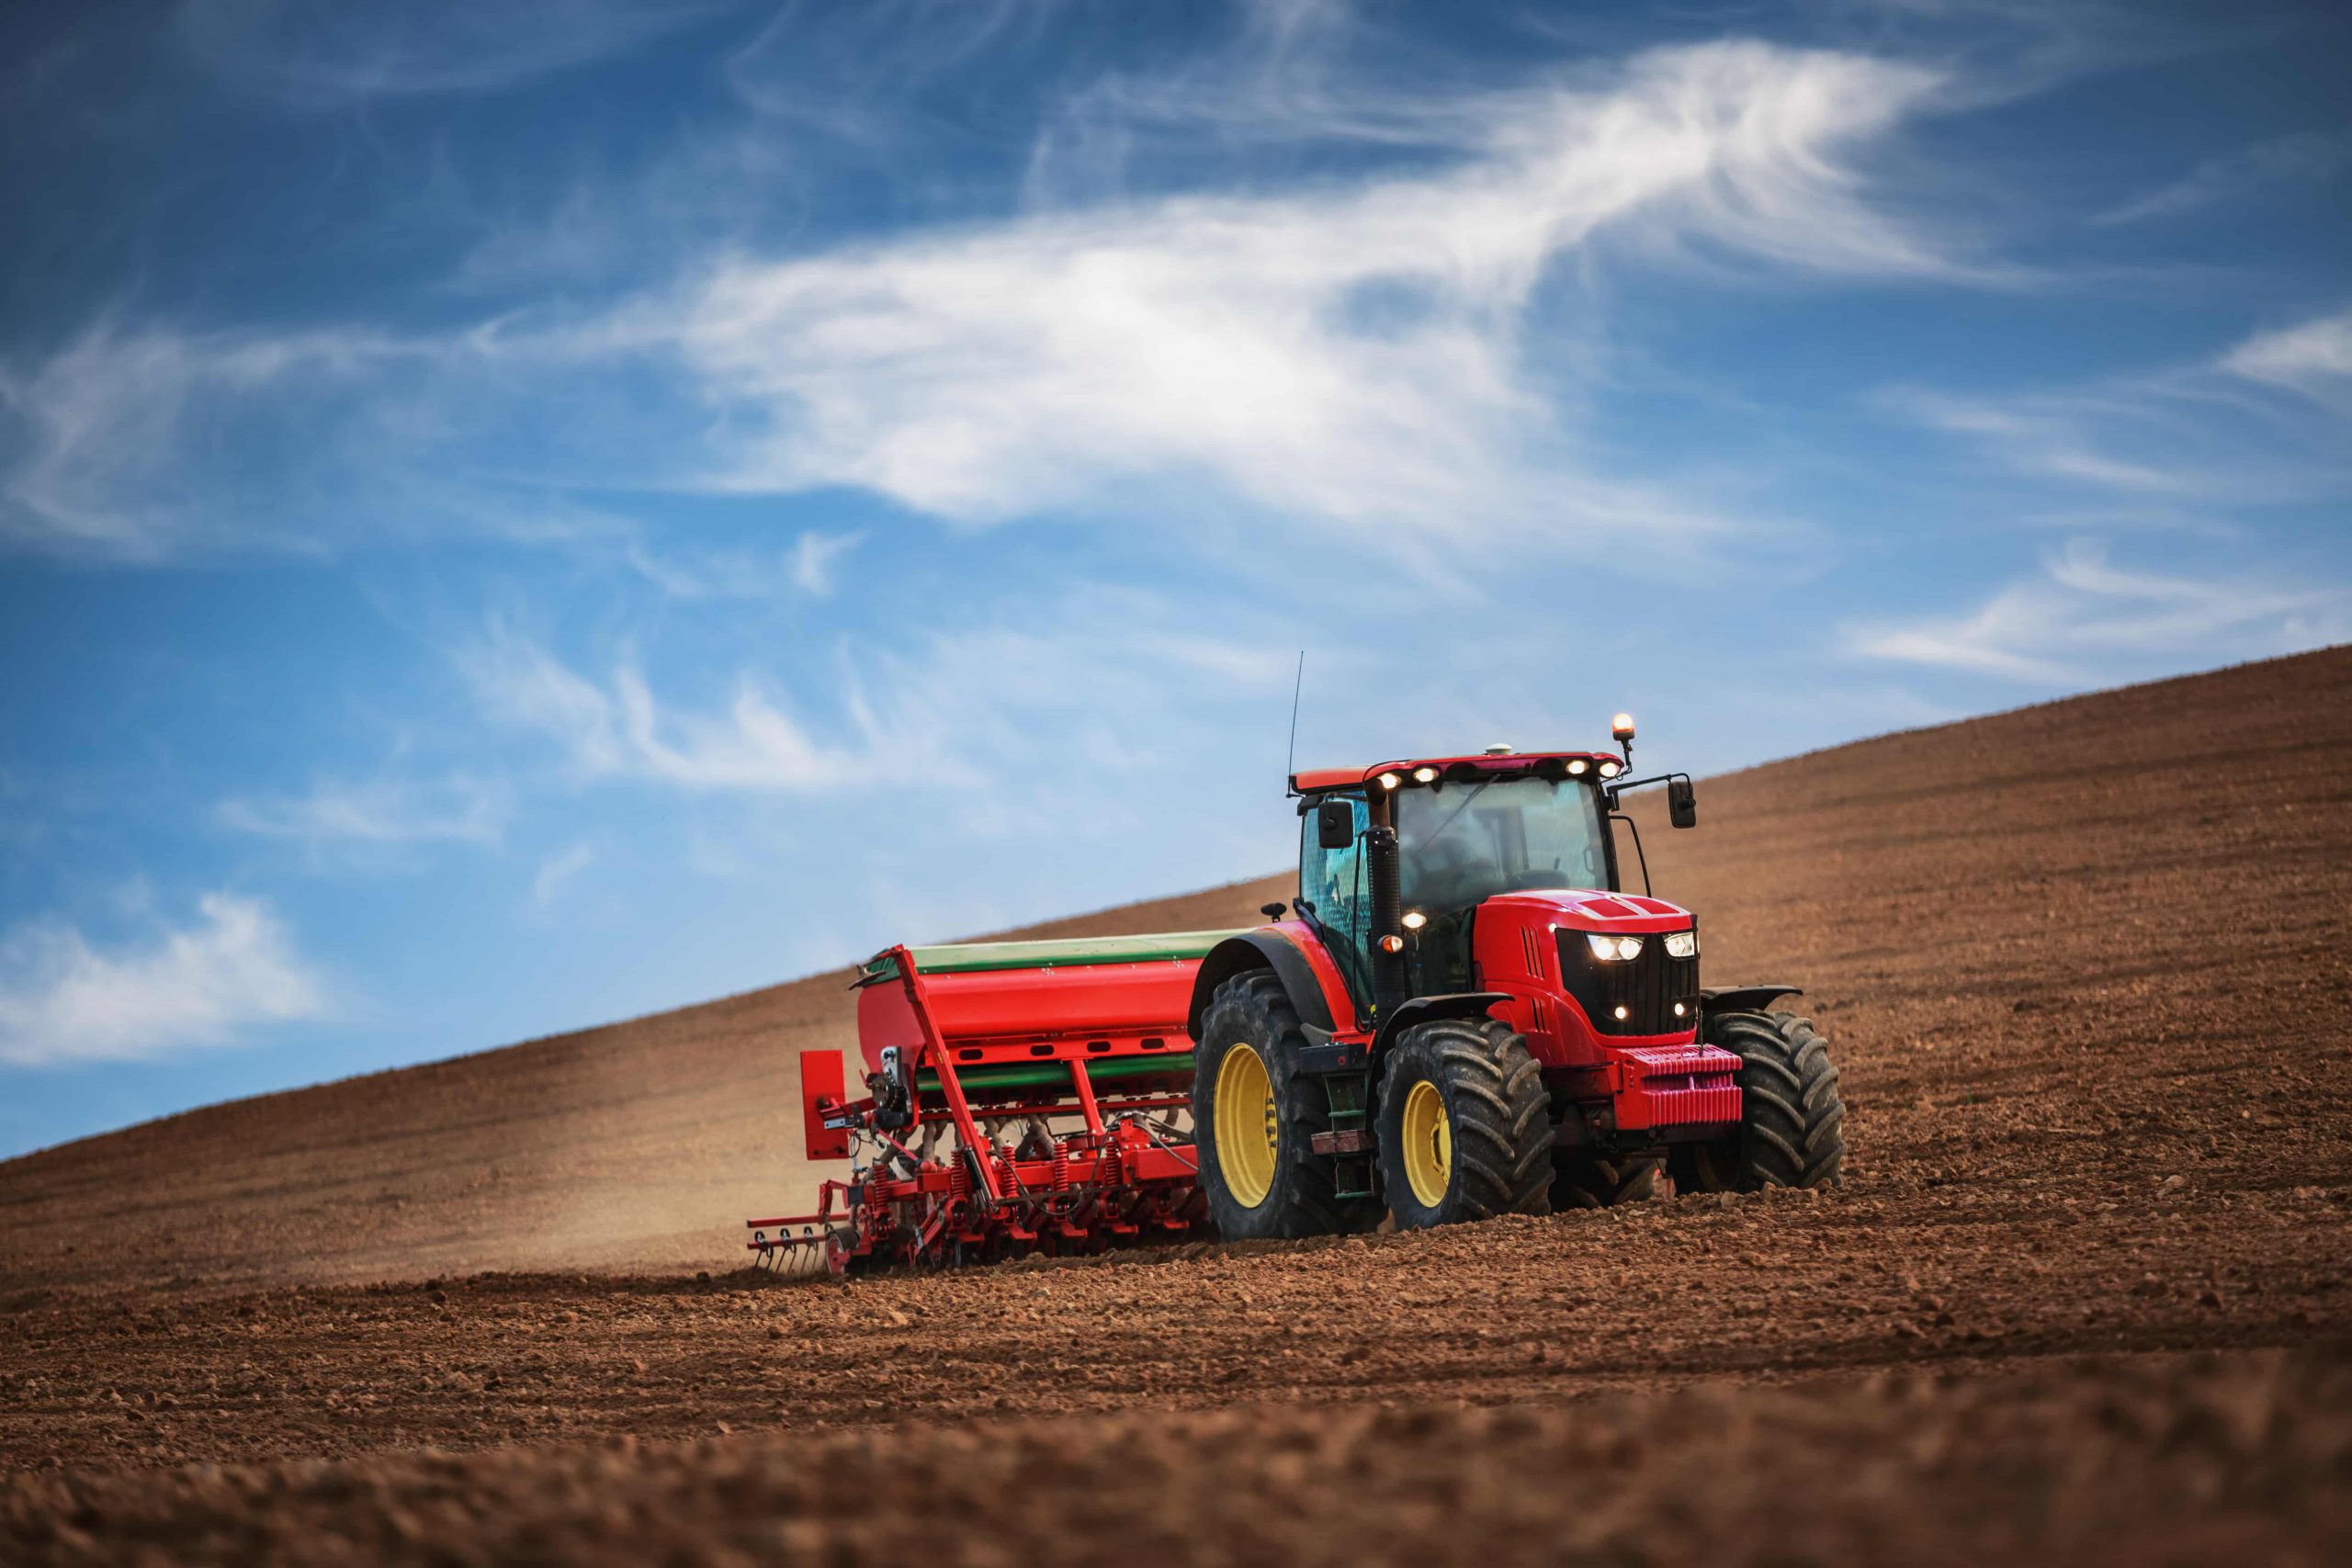 Does farm insurance cover machinery and equipment